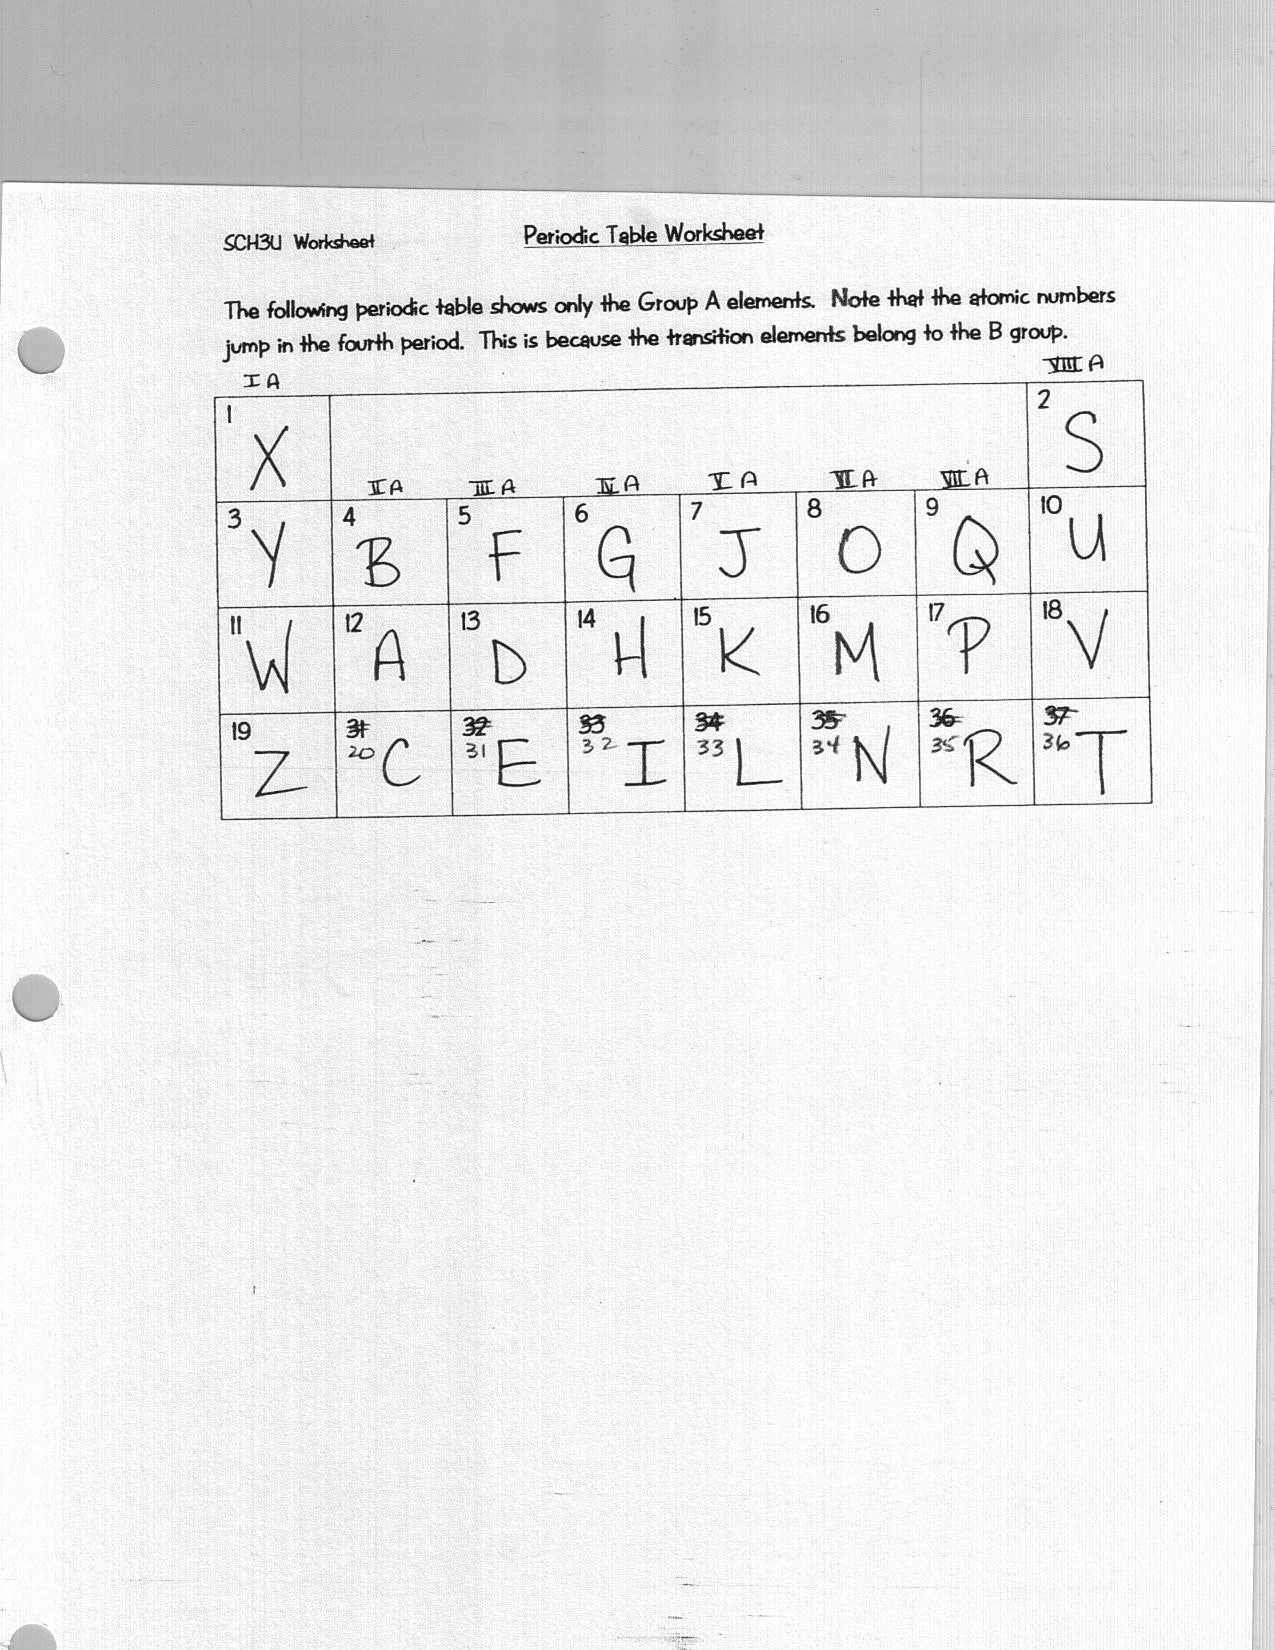 Nuclear Chemistry Worksheet as Well as Crossword Puzzle Chemistry Crossword Puzzle Gallery